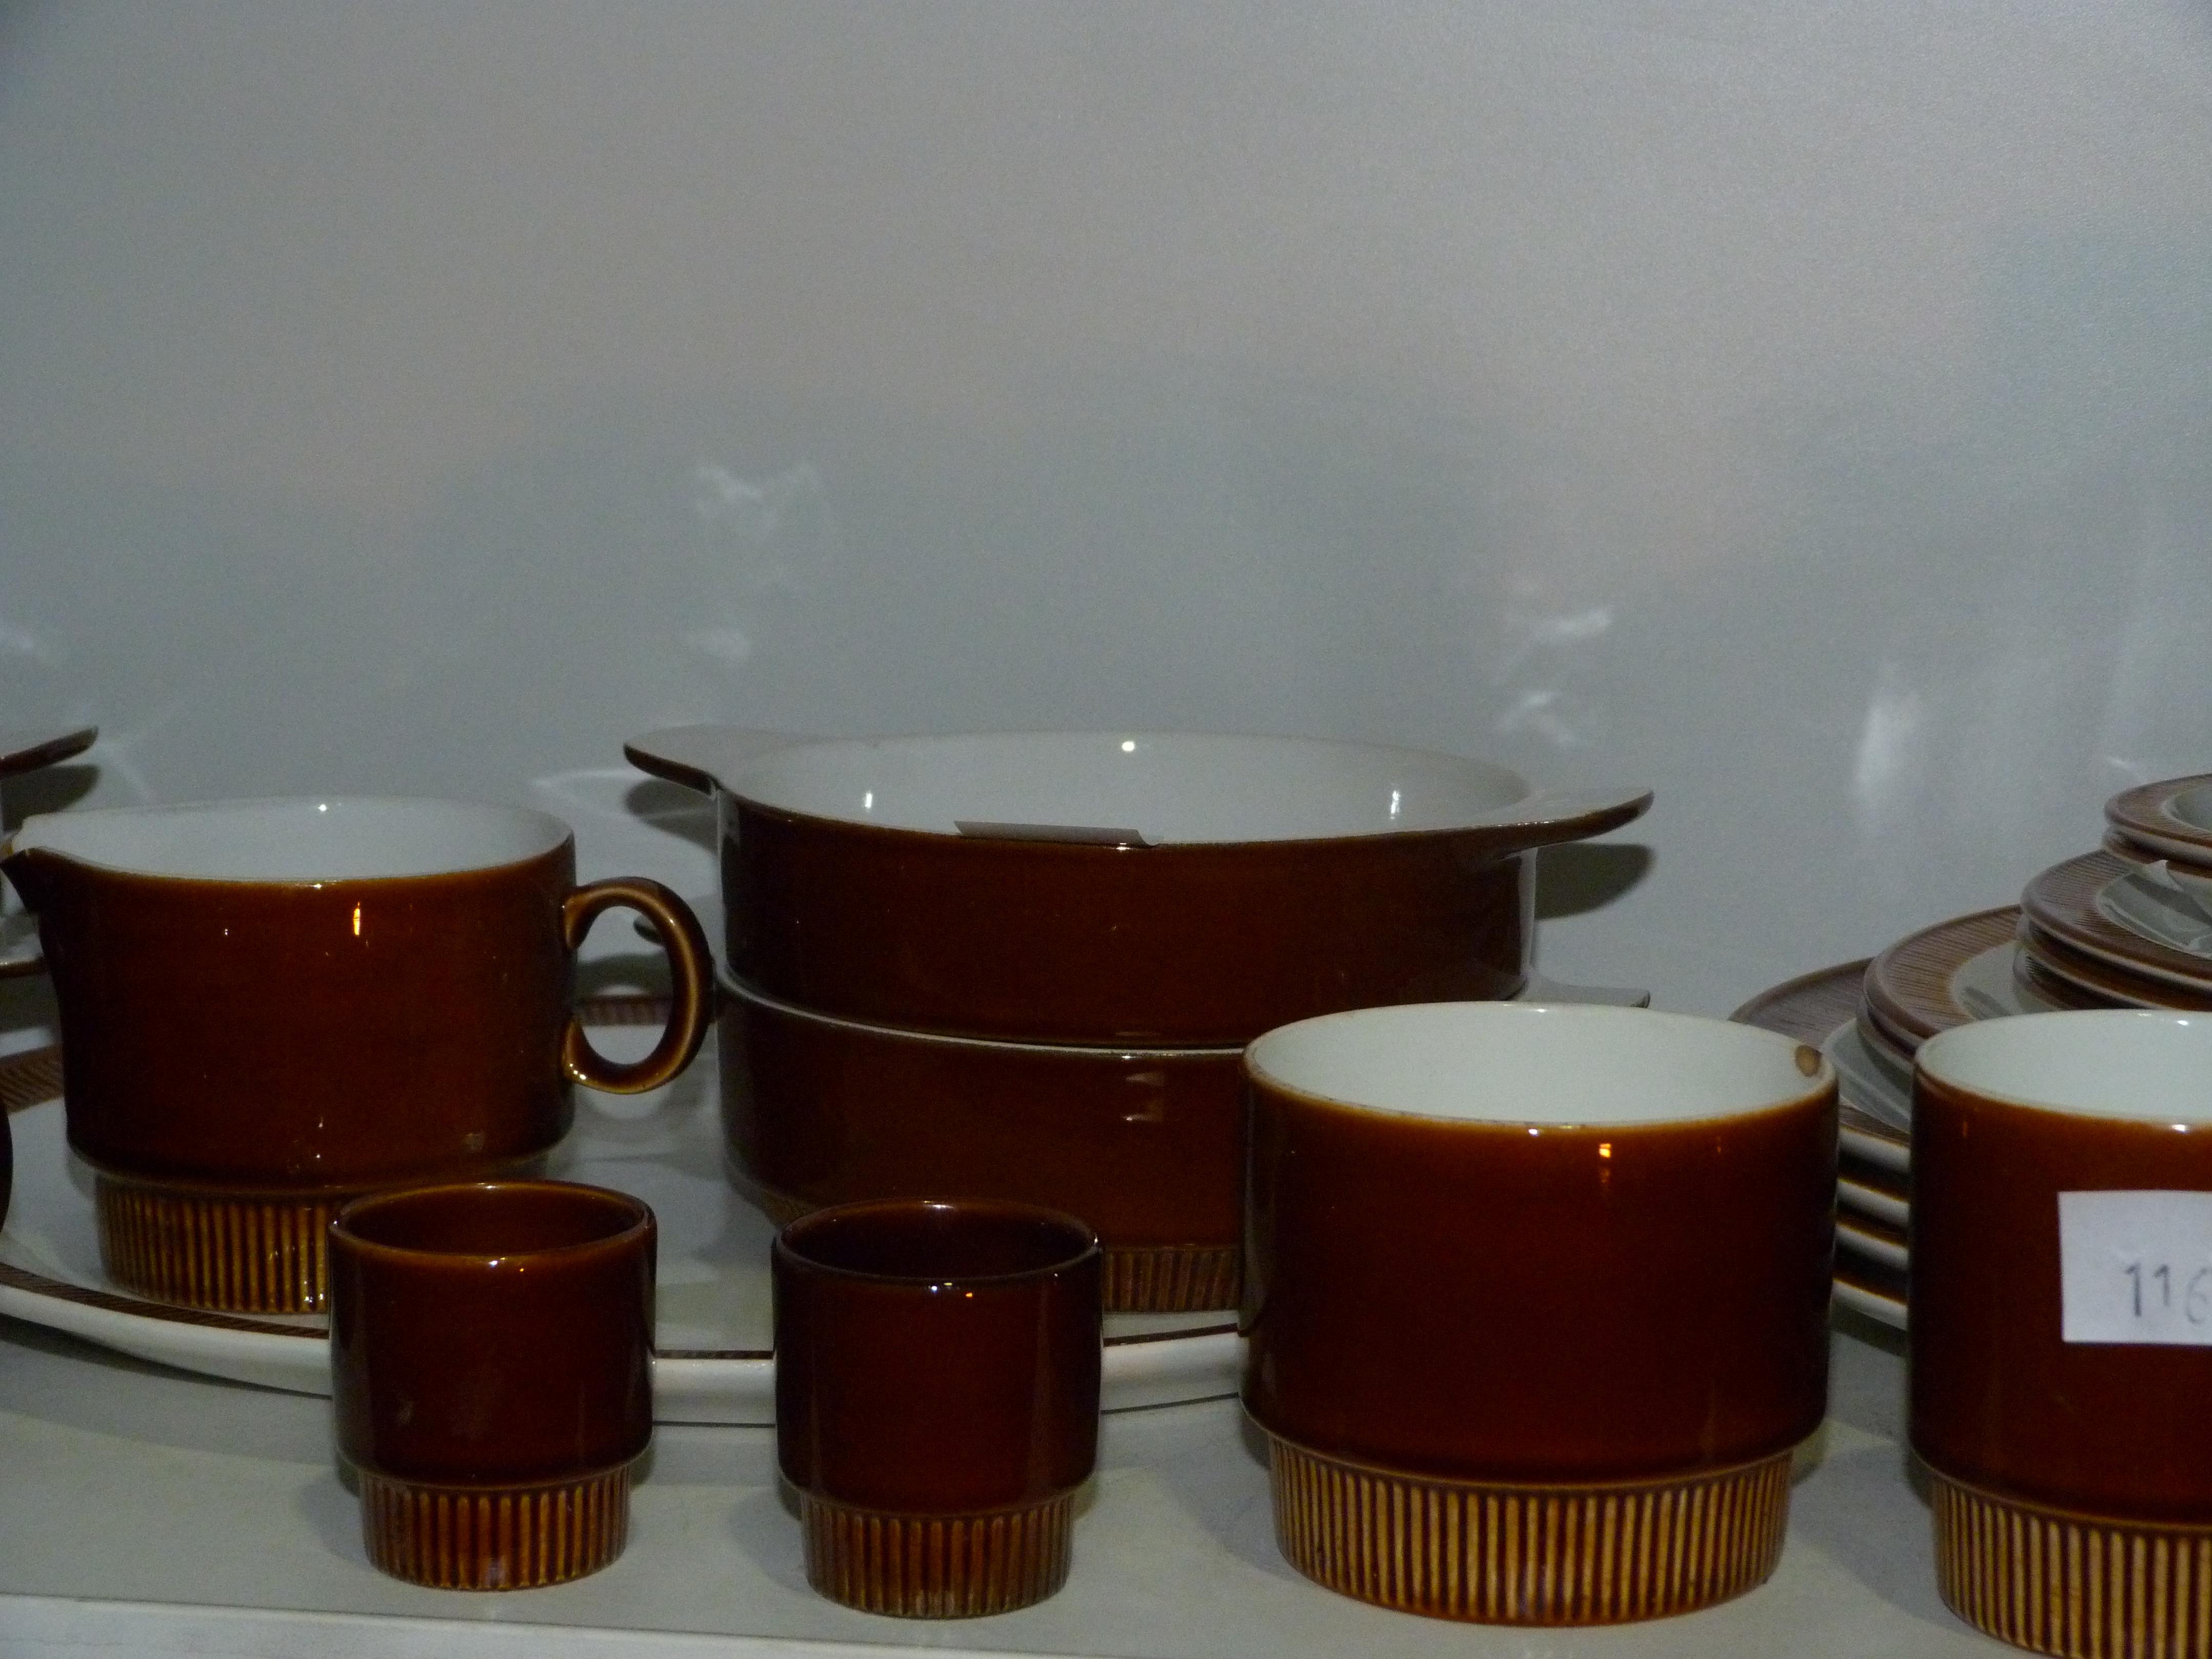 This is a Timed Online Auction on Bidspotter.co.uk, Click here to bid. A 'Poole' ceramic tea service - Image 4 of 4